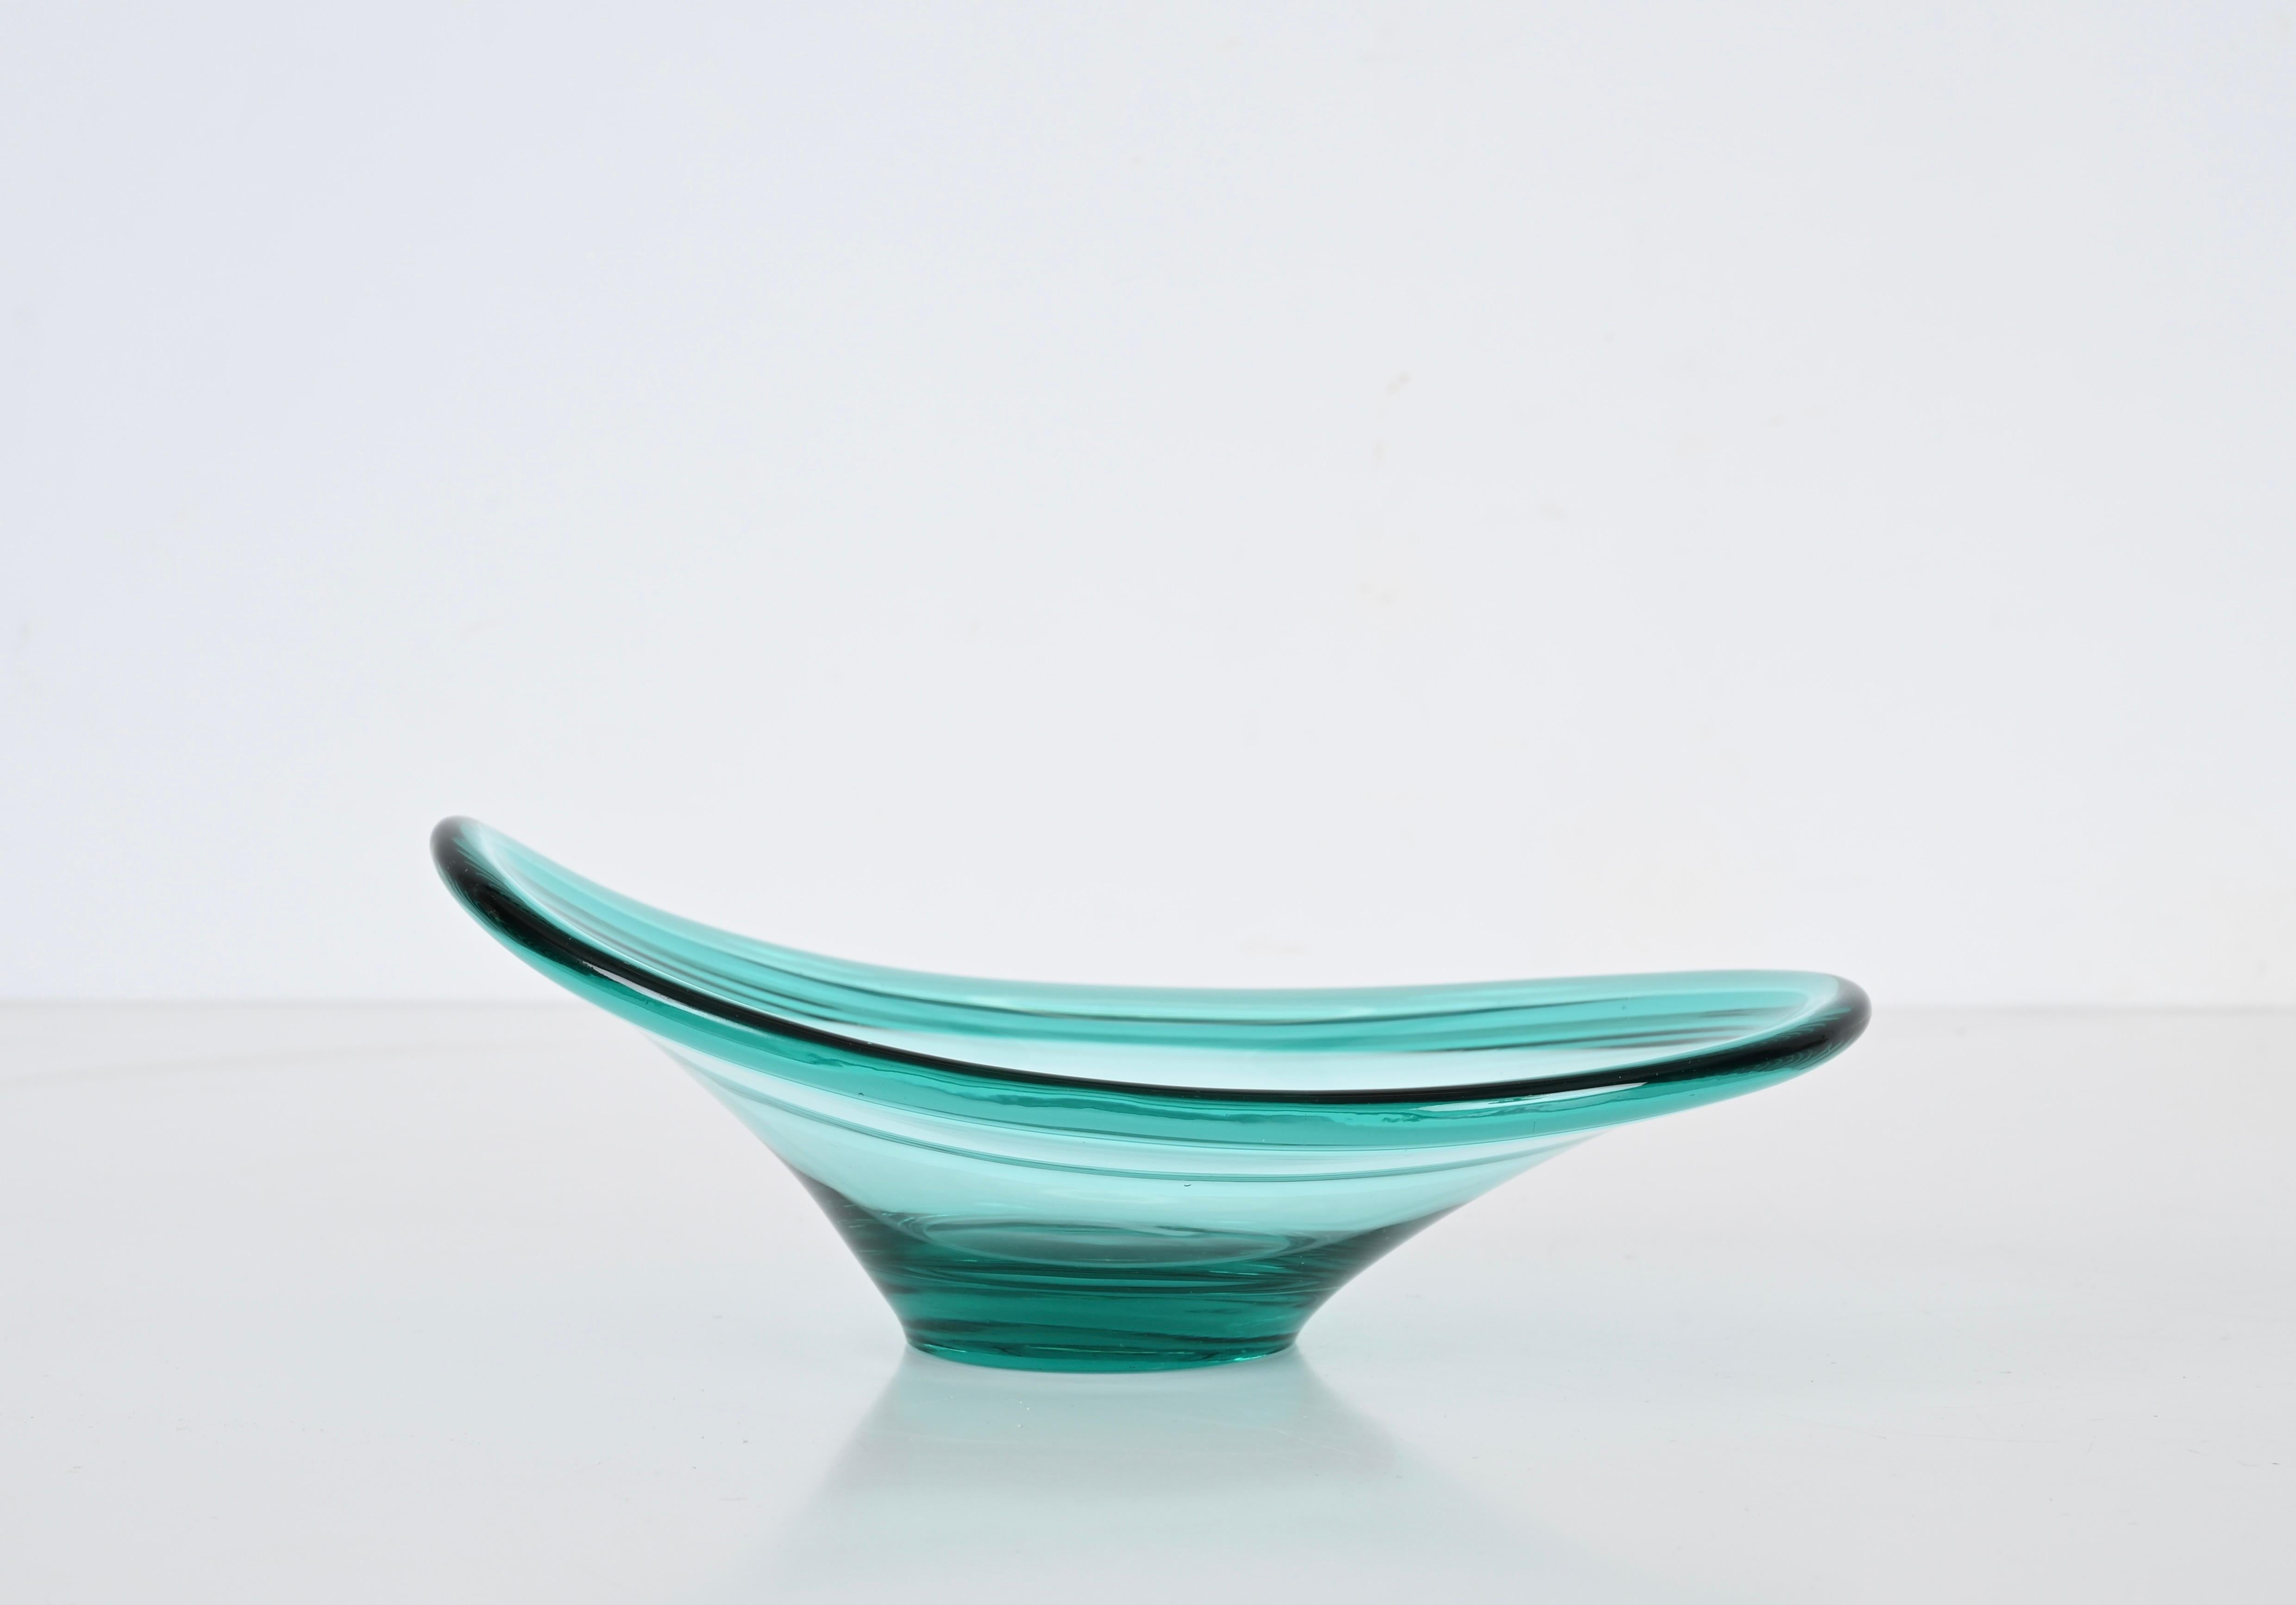 Marvelous tiffany blue glass bowl in Murano glass. This gorgeous piece was designed in Murano, Italy in the 1960s. 

This large bowl is in amazing conditions with no chips. It is made in a lovely turquoise art glass that becomes a deeper blue over